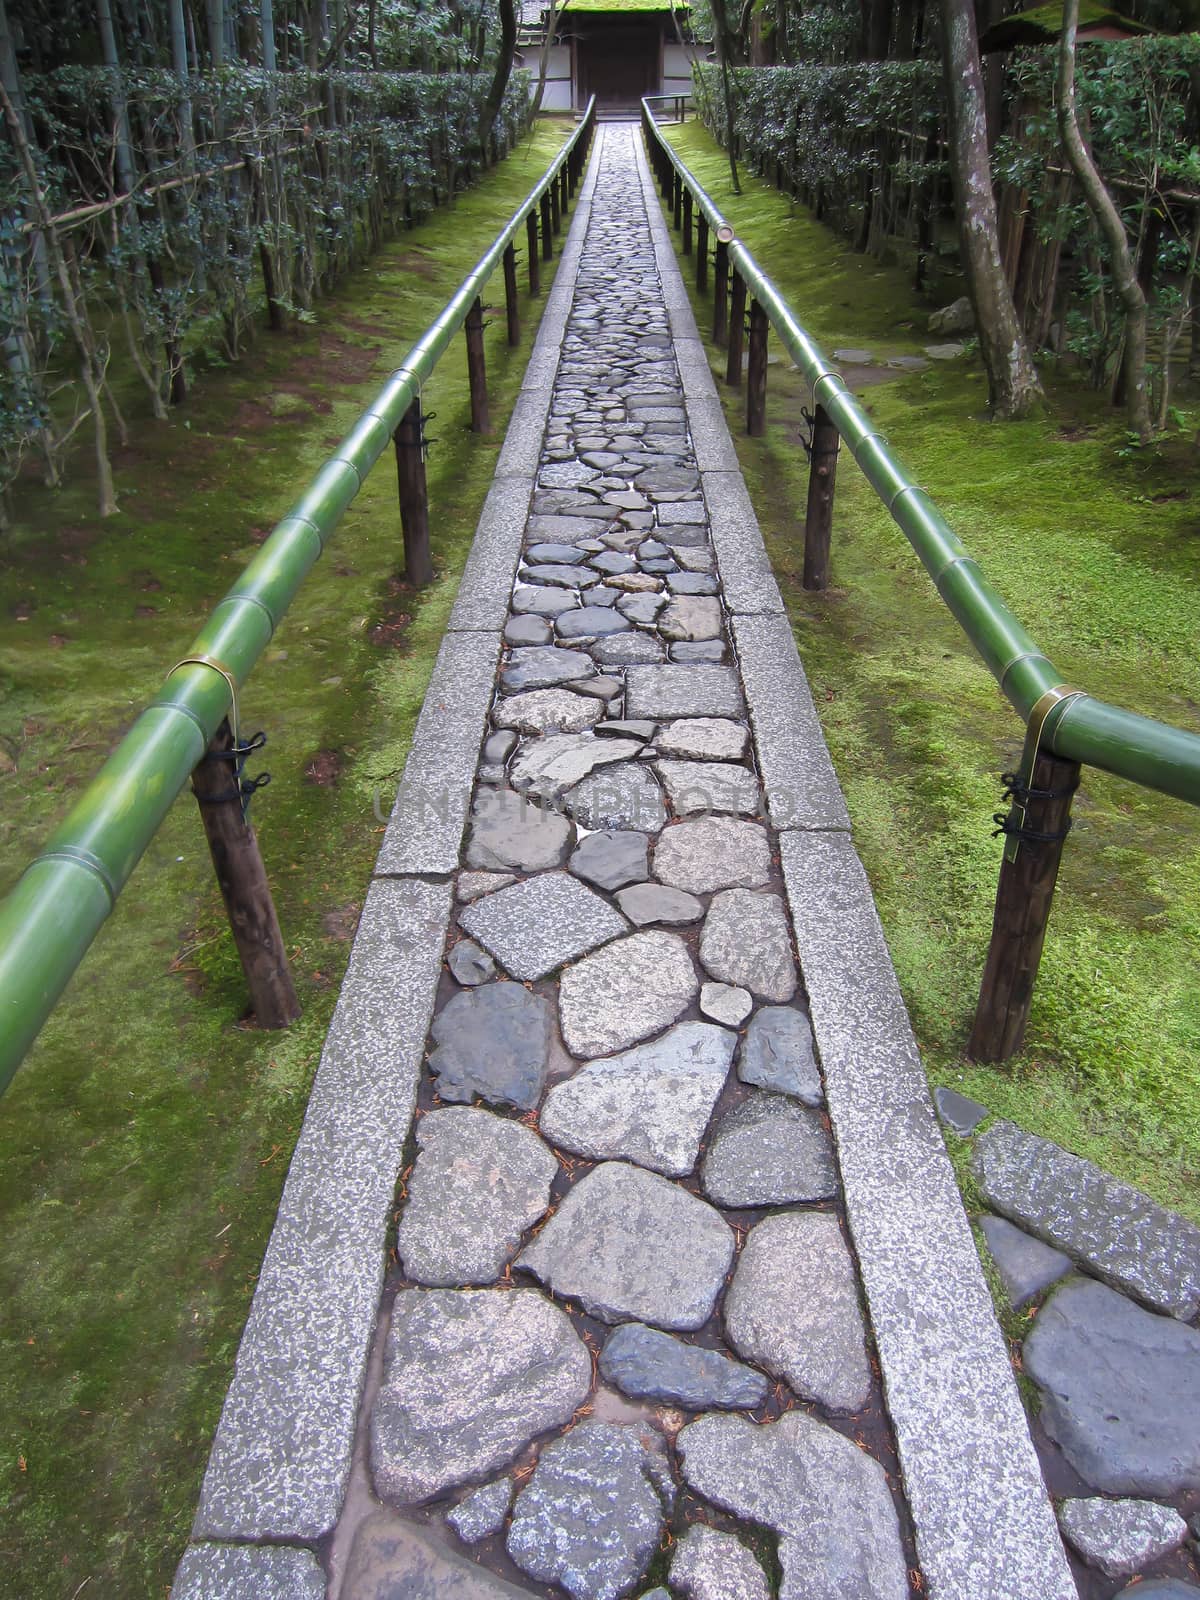 Long pathway made of stone leads through a green Japanese garden towards a temple entrance on a bright day in Kyoto.